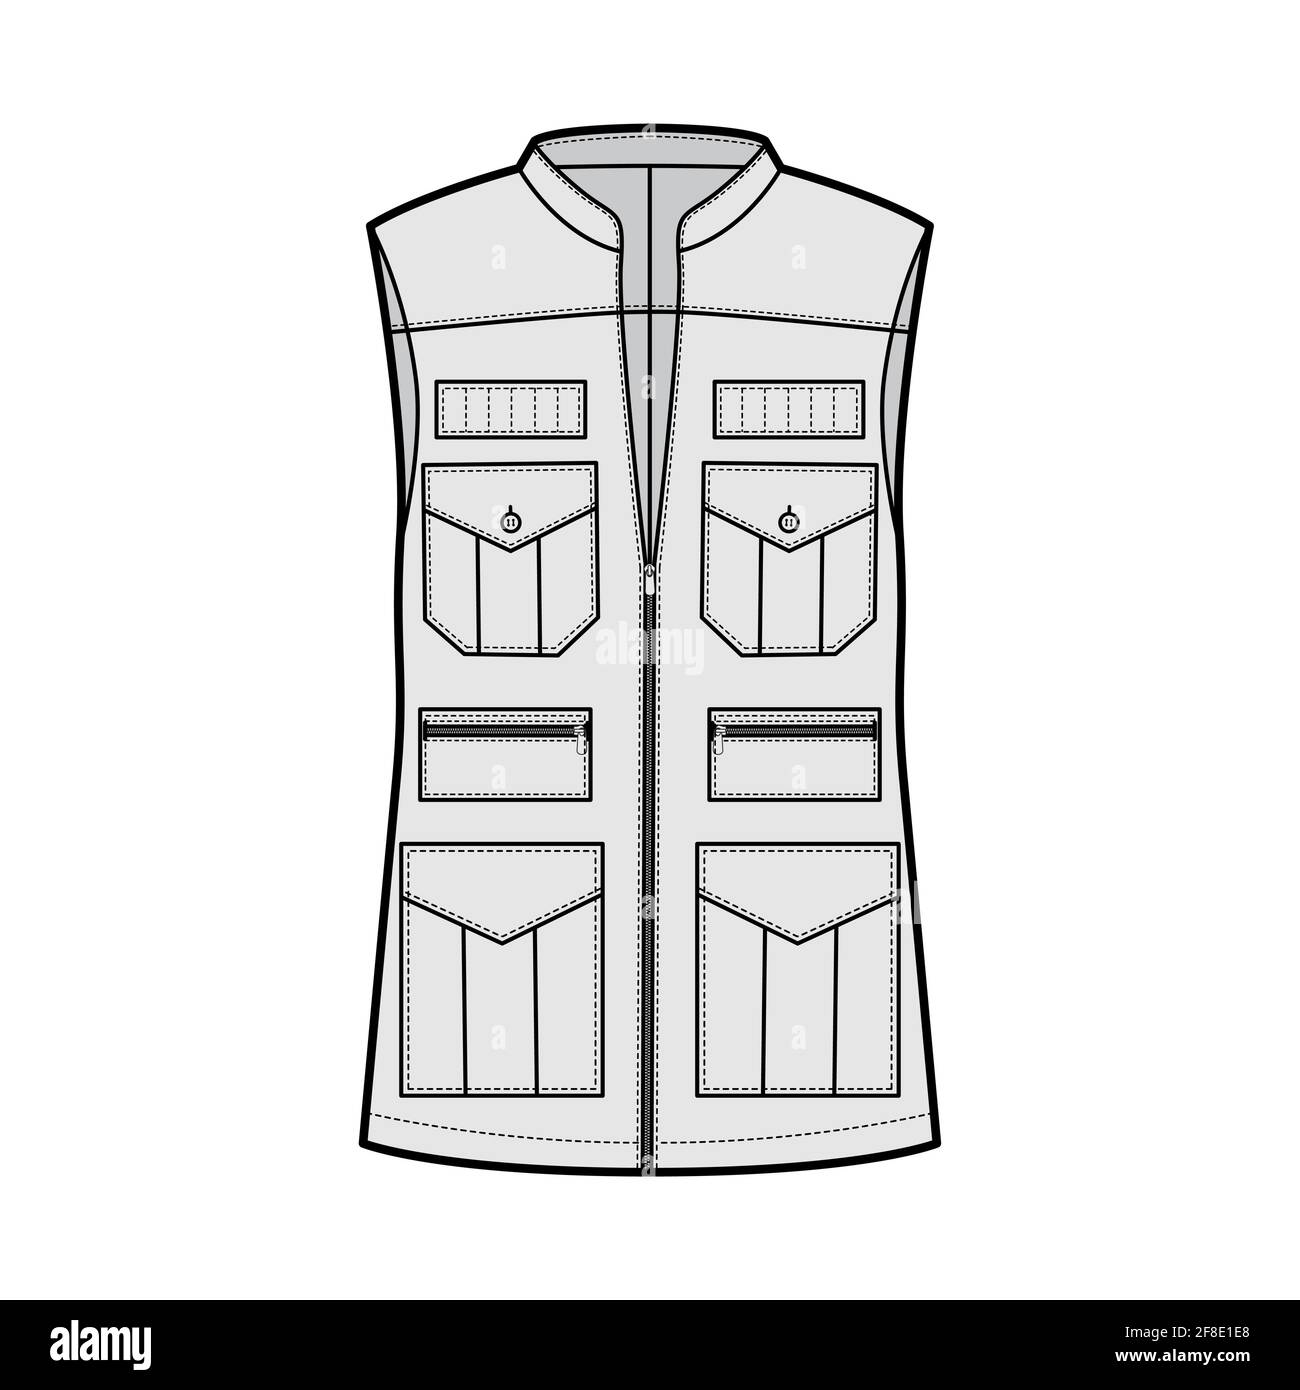 Safari vest waistcoat technical fashion illustration with sleeveless, stand collar, zip-up closure, pockets, oversized body. Flat template front, grey color style. Women, men, unisex top CAD mockup Stock Vector